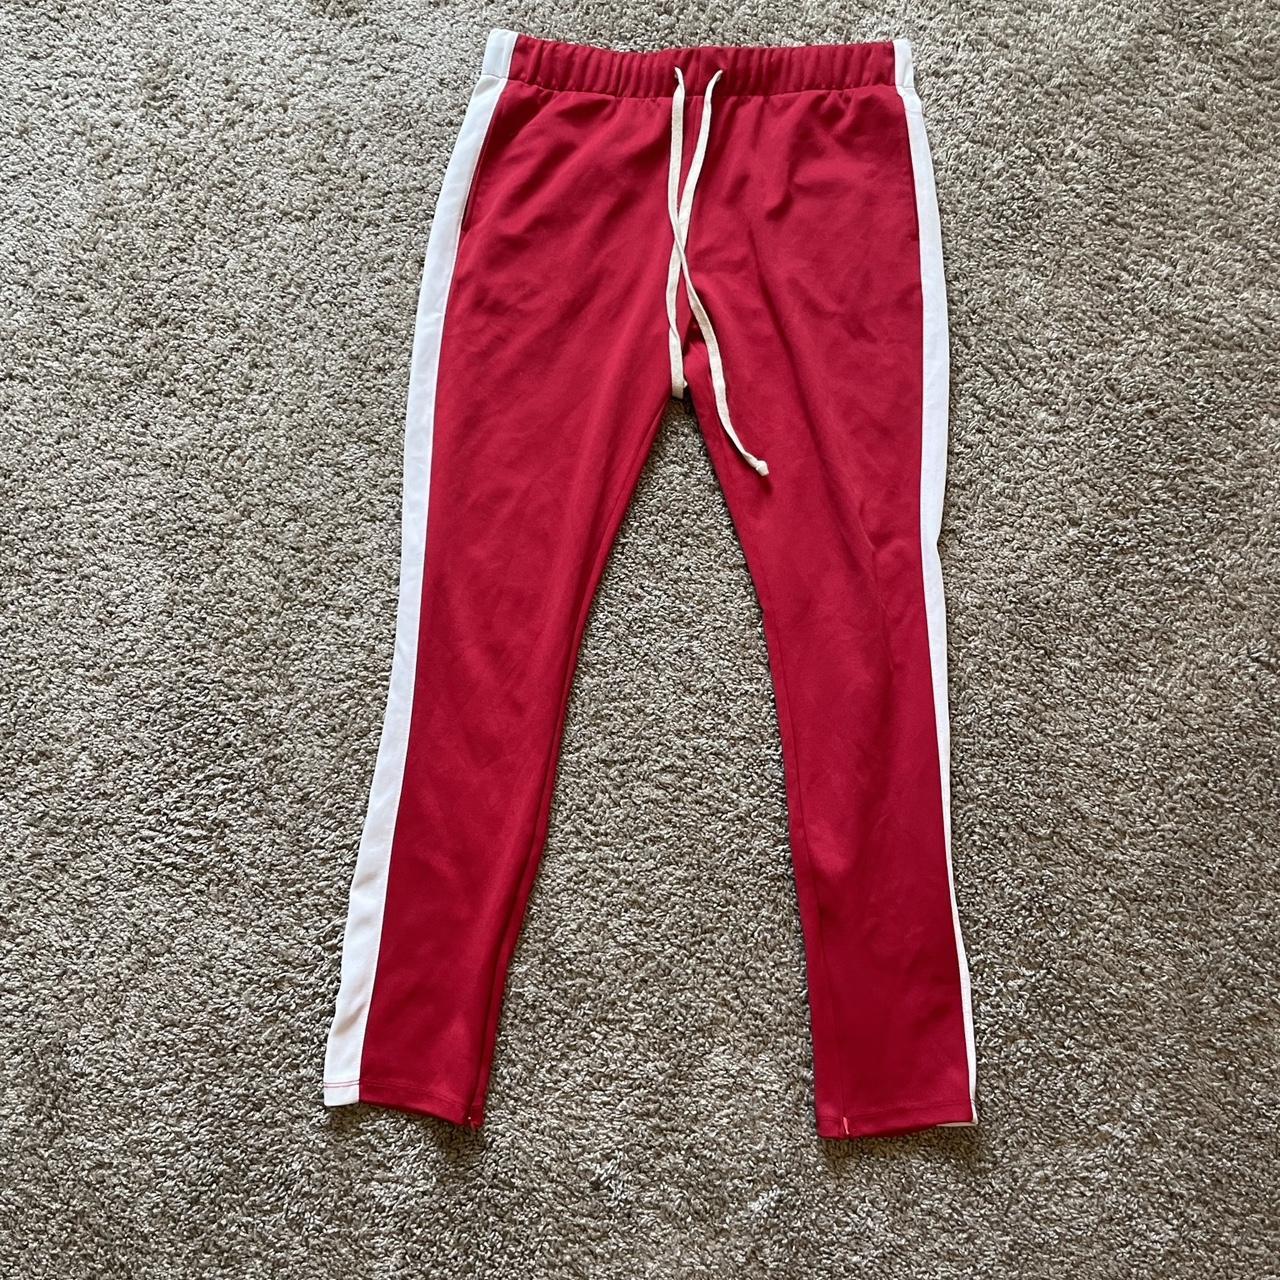 Men's Red and White Joggers-tracksuits | Depop